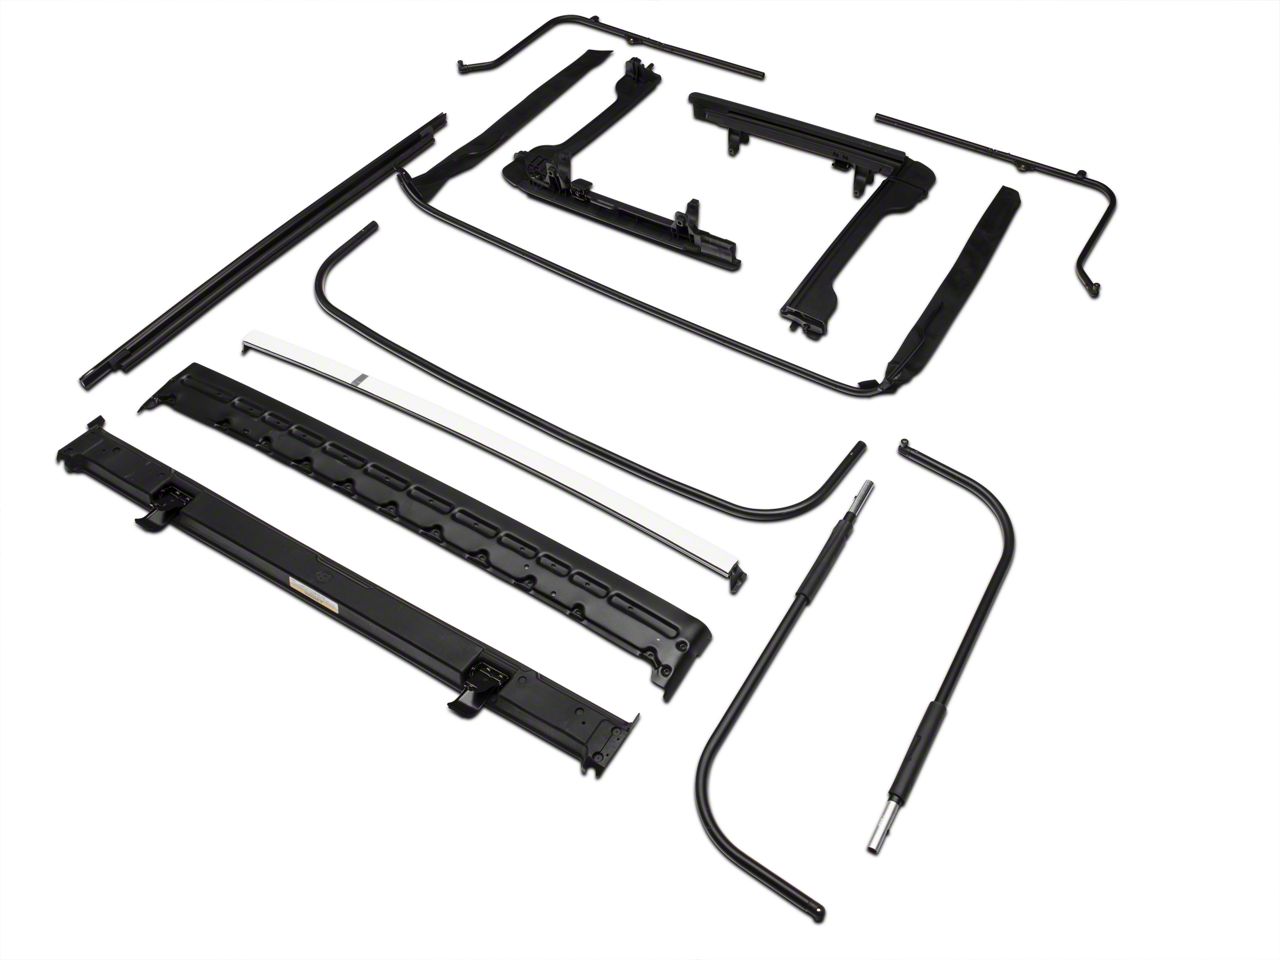 Bestop Jeep Wrangler OE Style Soft Top Replacement Bow and Frame Kit  55000-01 (07-18 Jeep Wrangler JK 2-Door) - Free Shipping